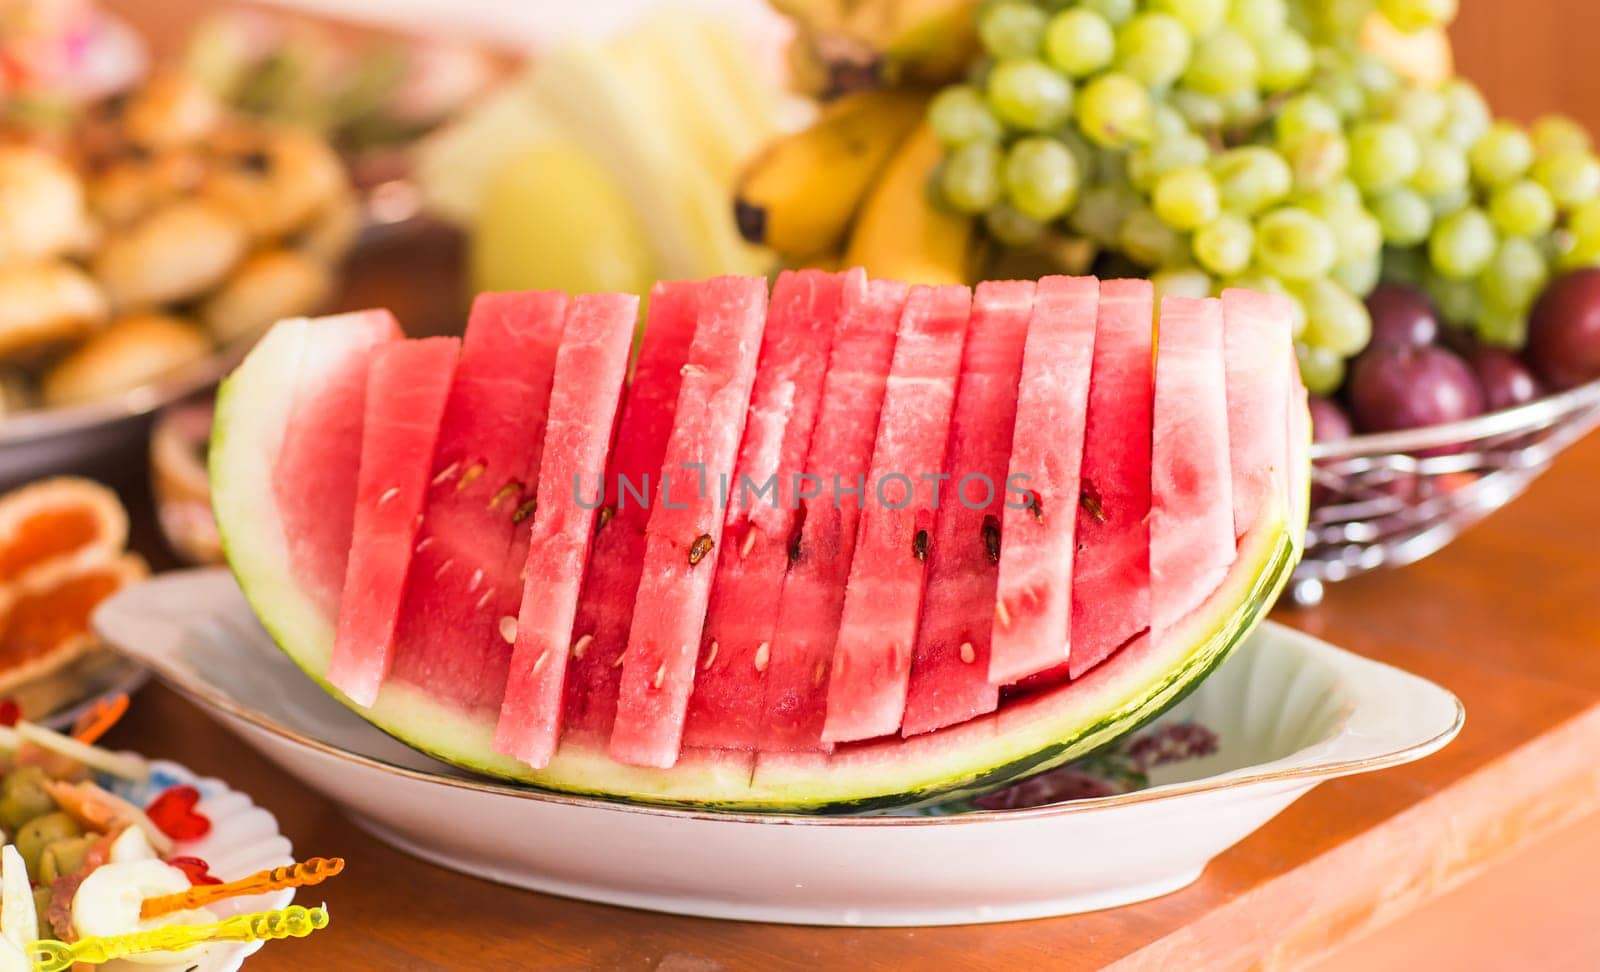 Sliced watermelon on a dish. Sweet berry on the table. The pink flesh of watermelon for dessert. Healthy food for vegetarians. Festive table setting with fruit and berries.